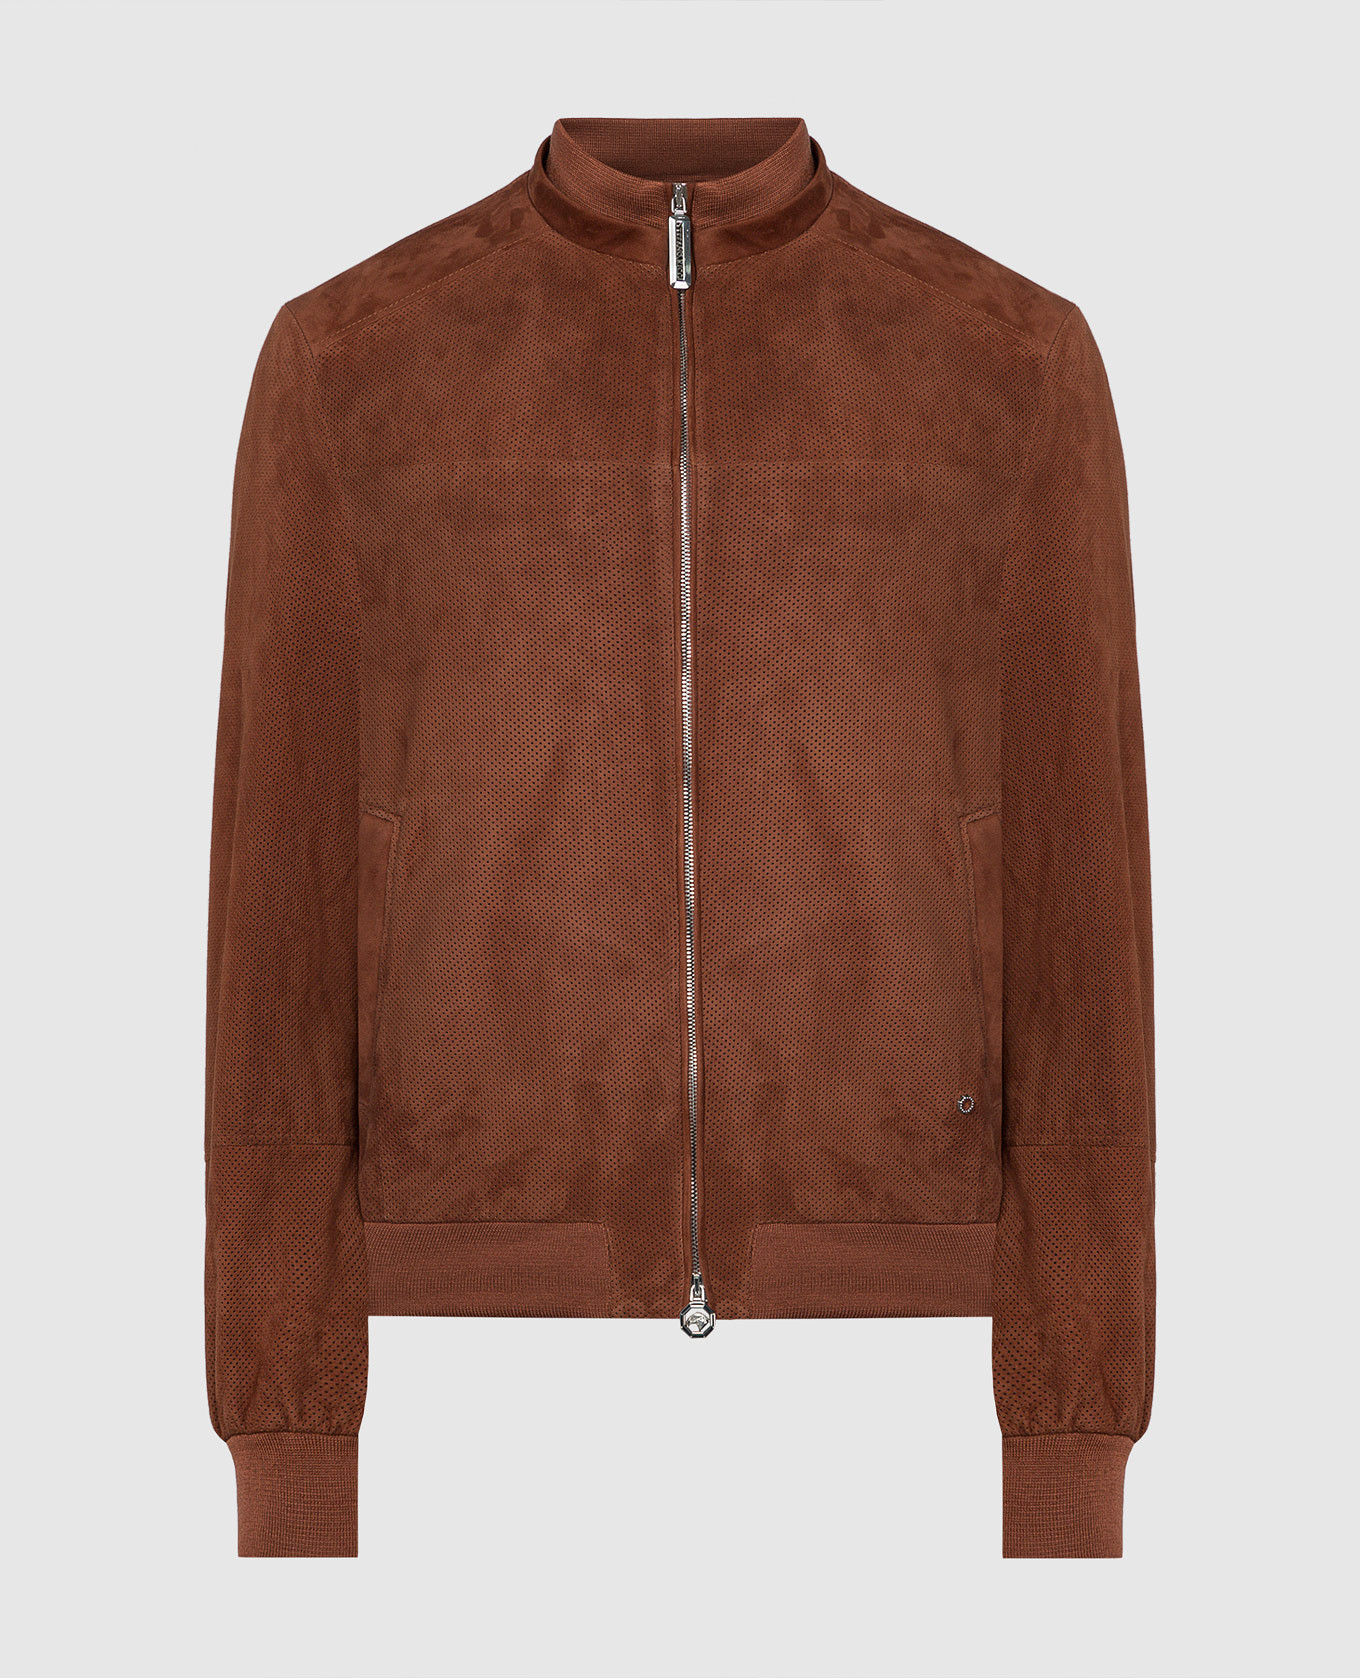 Brown leather jacket with metal logo perforation